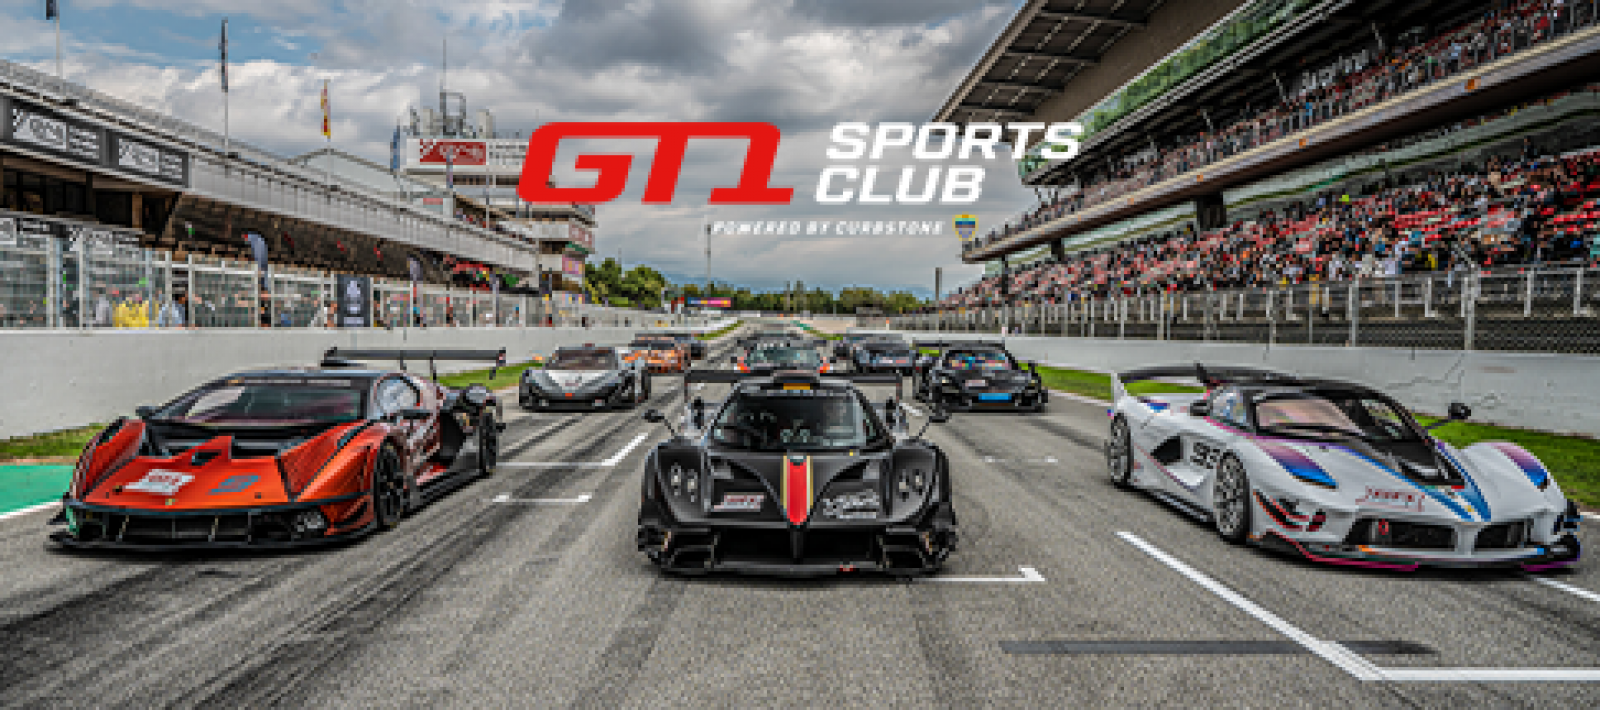 First car line-up confirmed for GT1 Sports Club season opening event at Circuit Paul Ricard